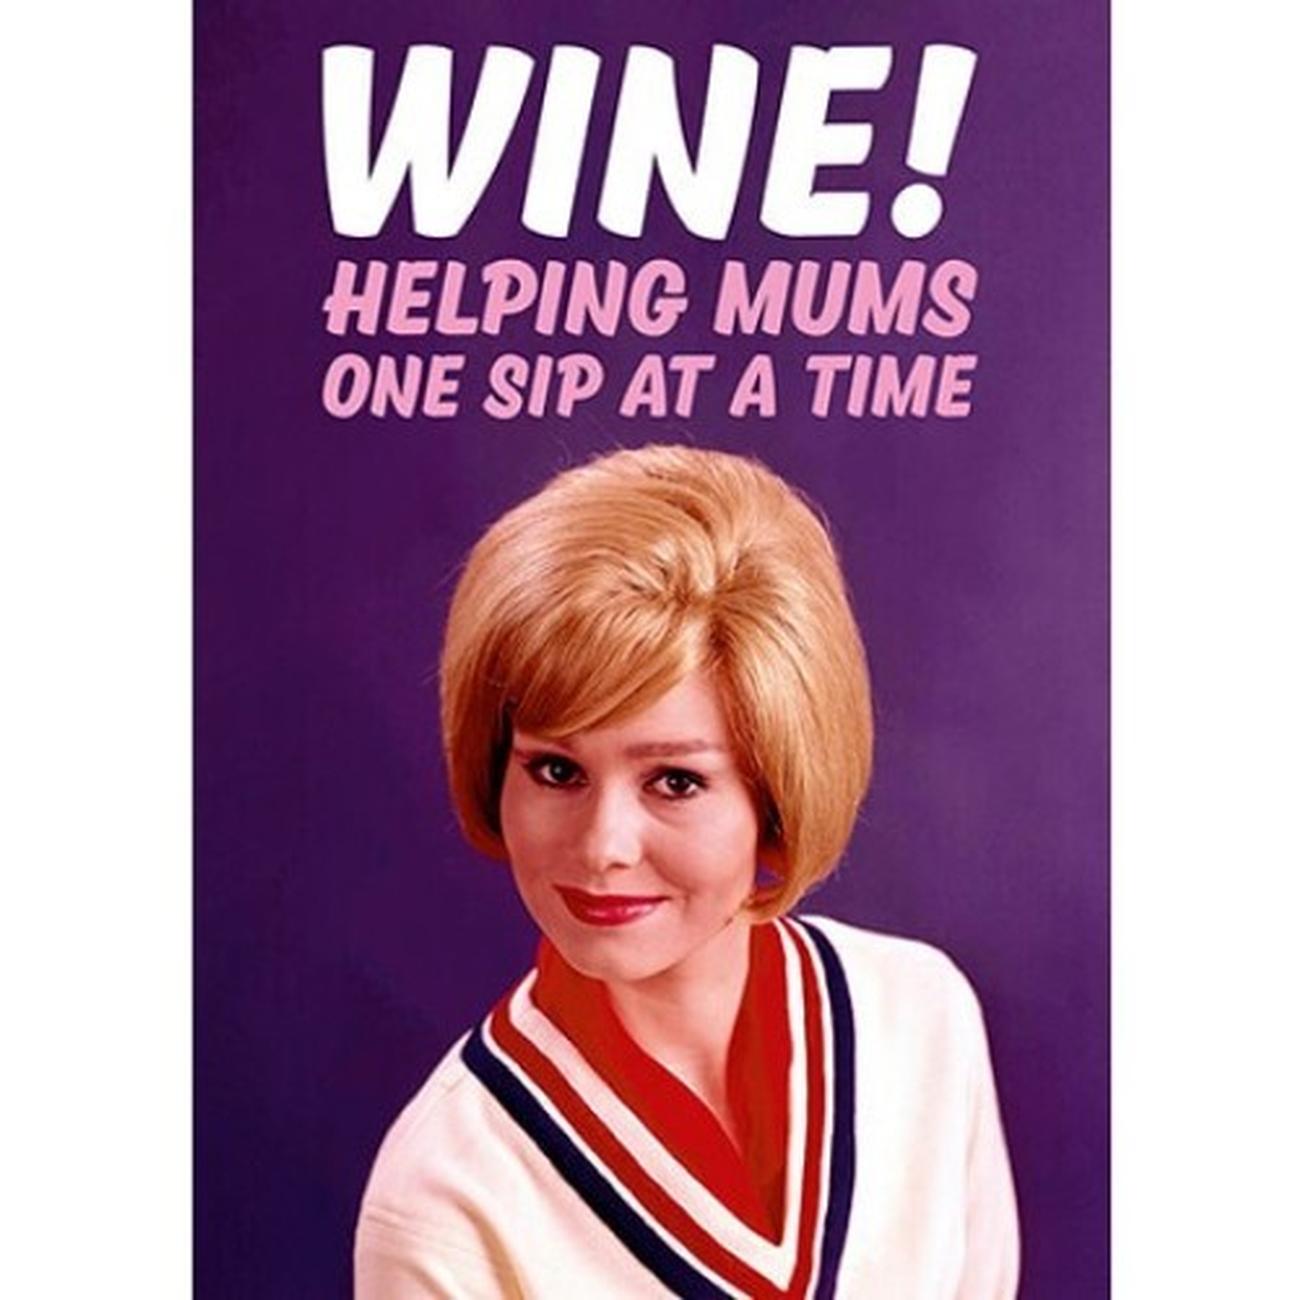 dean-morris-wine-helping-mums-one-sip-at-a-time-mothers-day-card - Wine, Helping Mums One Sip At A Time Mother's Day Card